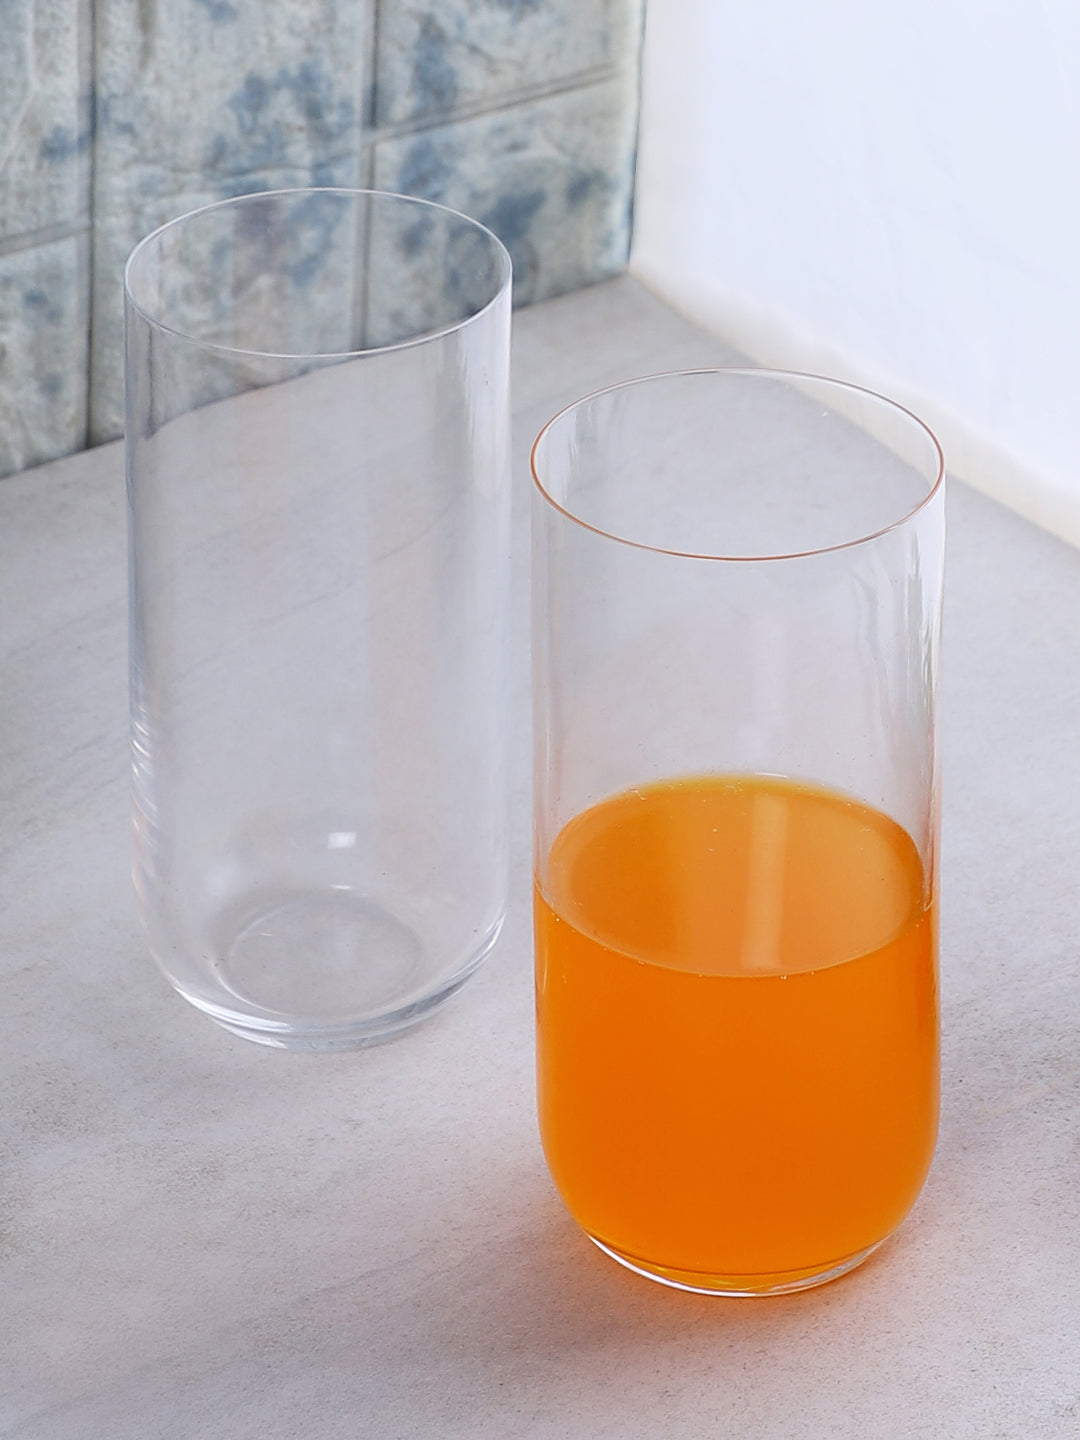 Premium Quality Glassware - Ideal for highball cocktails and other beverages.